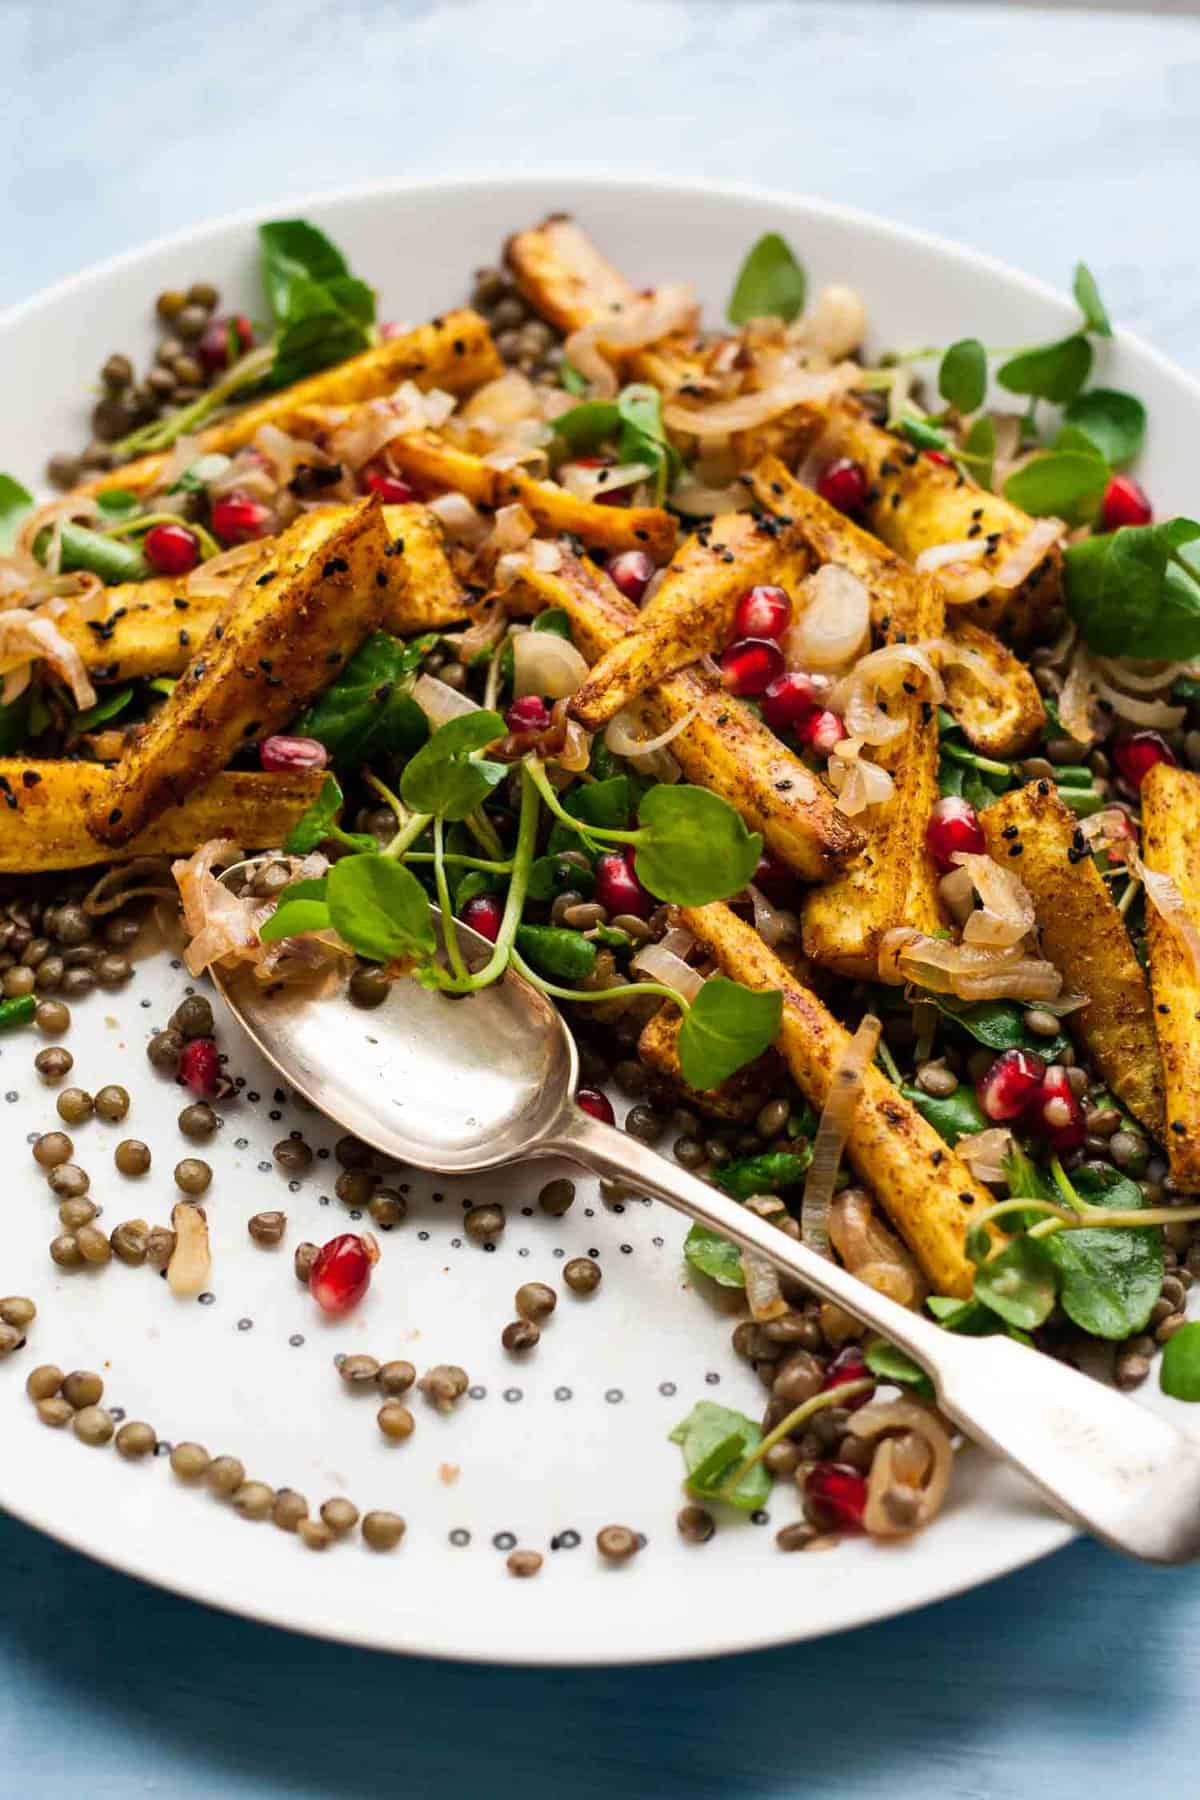 Indian-Spiced Parsnip & Lentil Salad - a warmly spiced and nourishing salad, perfect for chilly days when you're craving something lighter yet still satisfying | eatloveeats.com